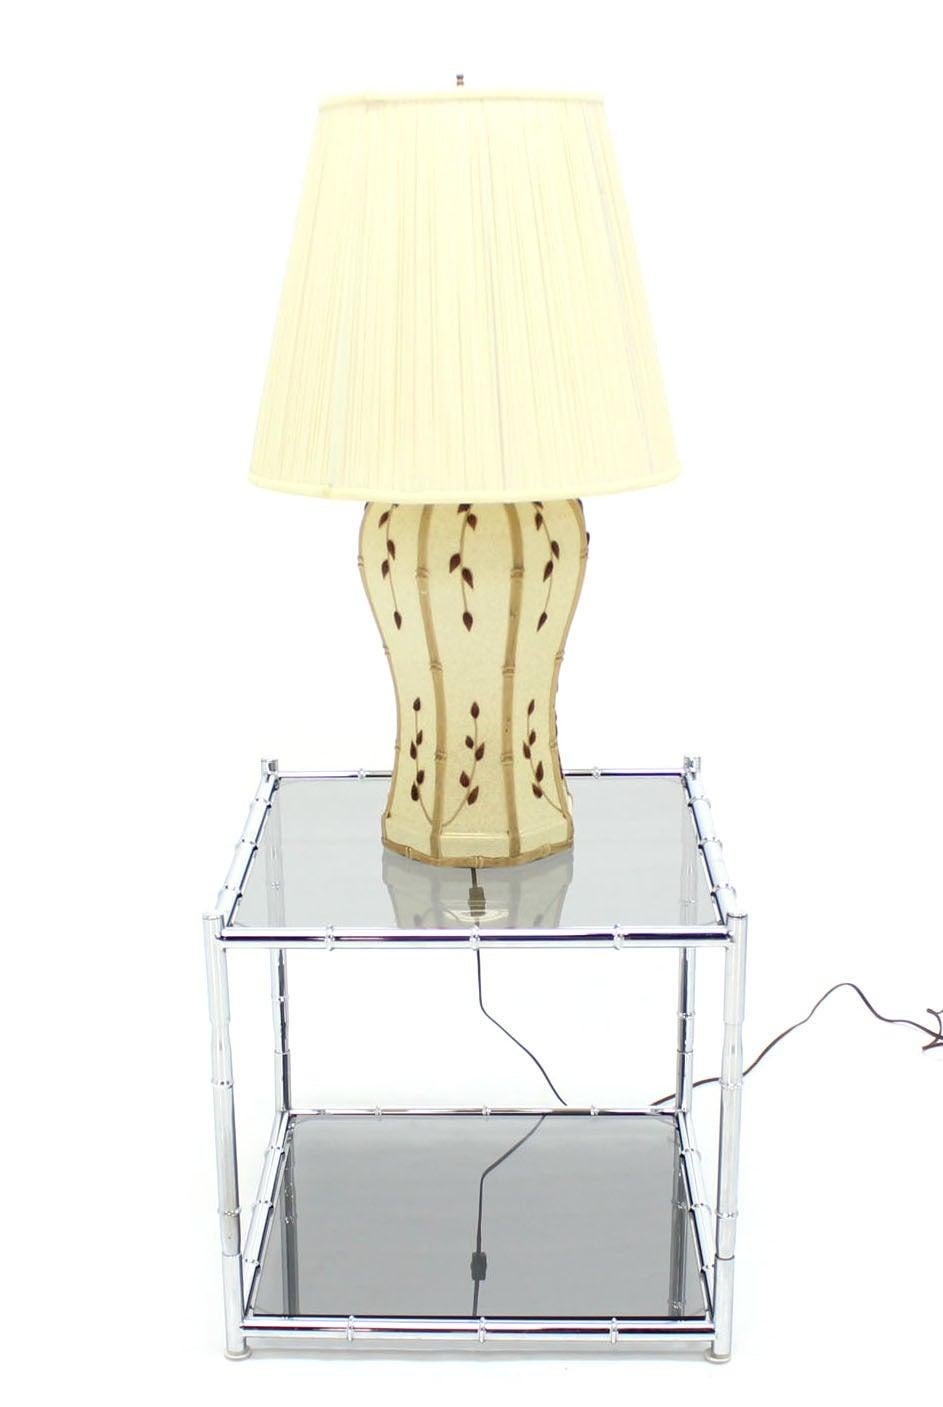 20th Century Faux Bamboo Motive Art Pottery Decorated Mid-Century Modern Ceramic Lamp MITN! For Sale